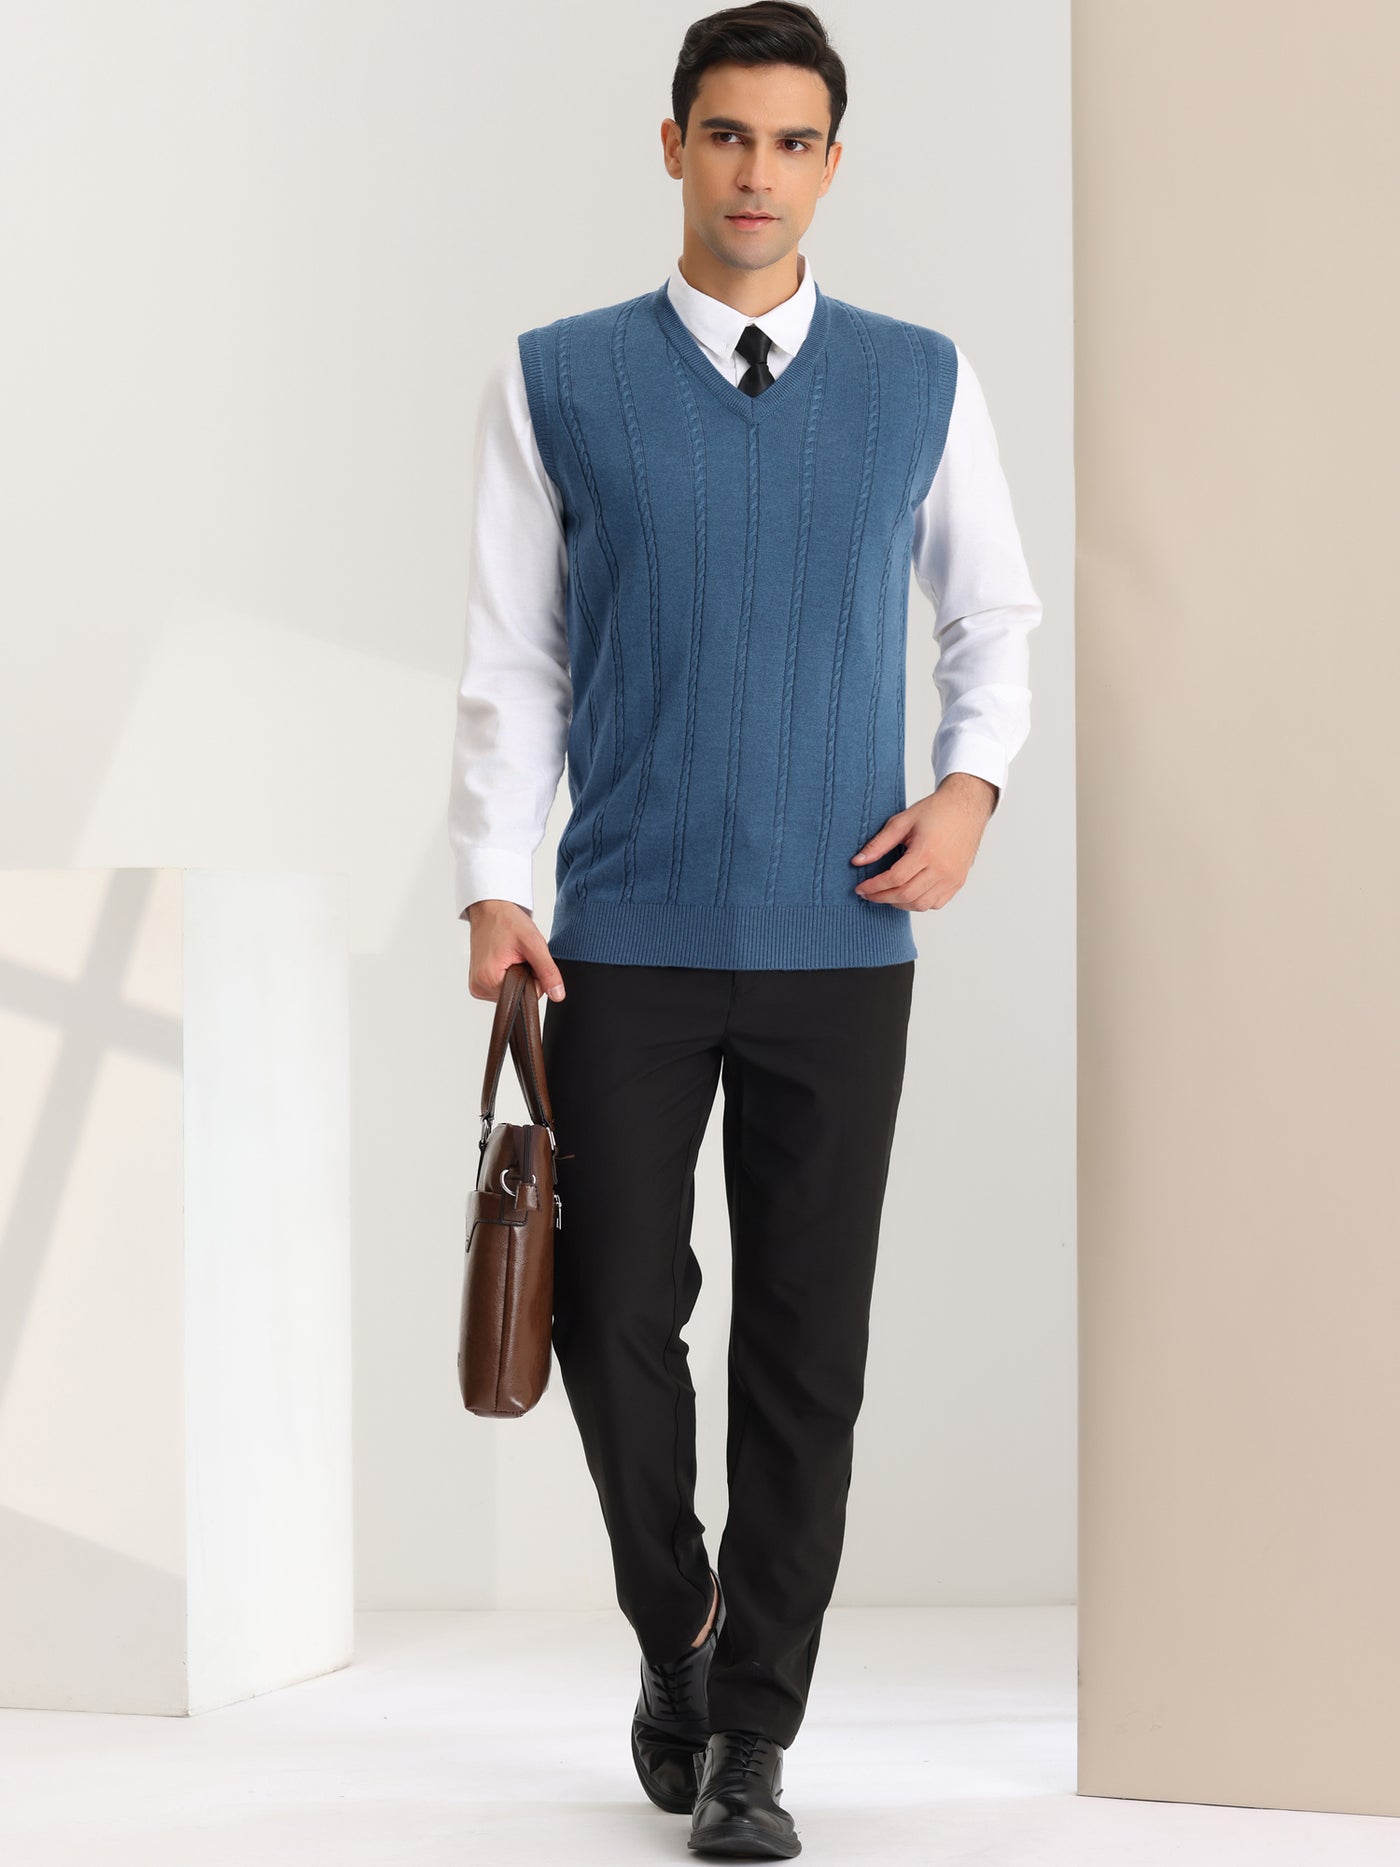 Bublédon Men's Sleeveless V-Neck Solid Color Cable Knitted Sweater Vest